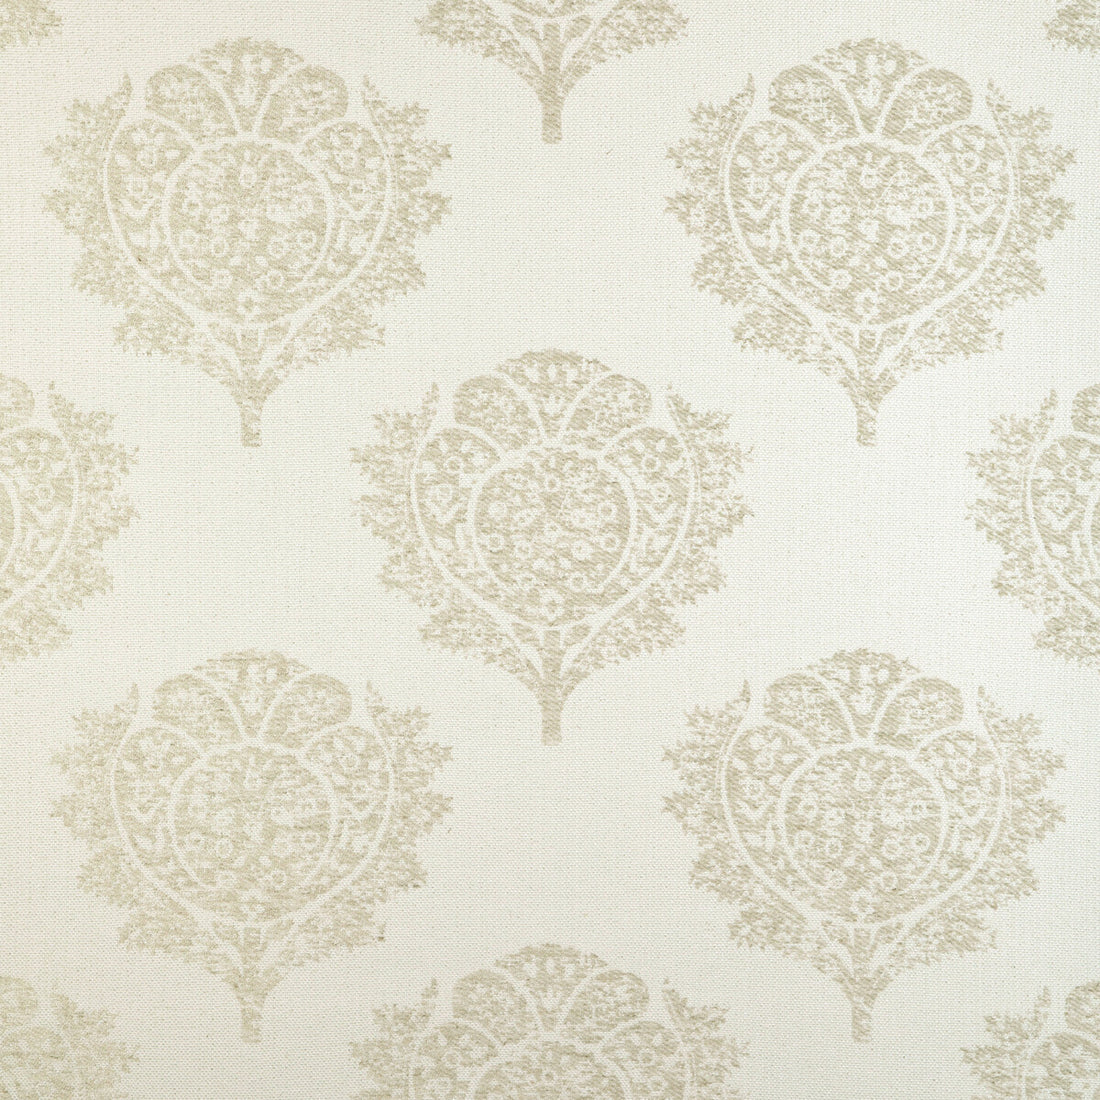 Heirlooms fabric in oyster color - pattern 36864.1116.0 - by Kravet Couture in the Atelier Weaves collection